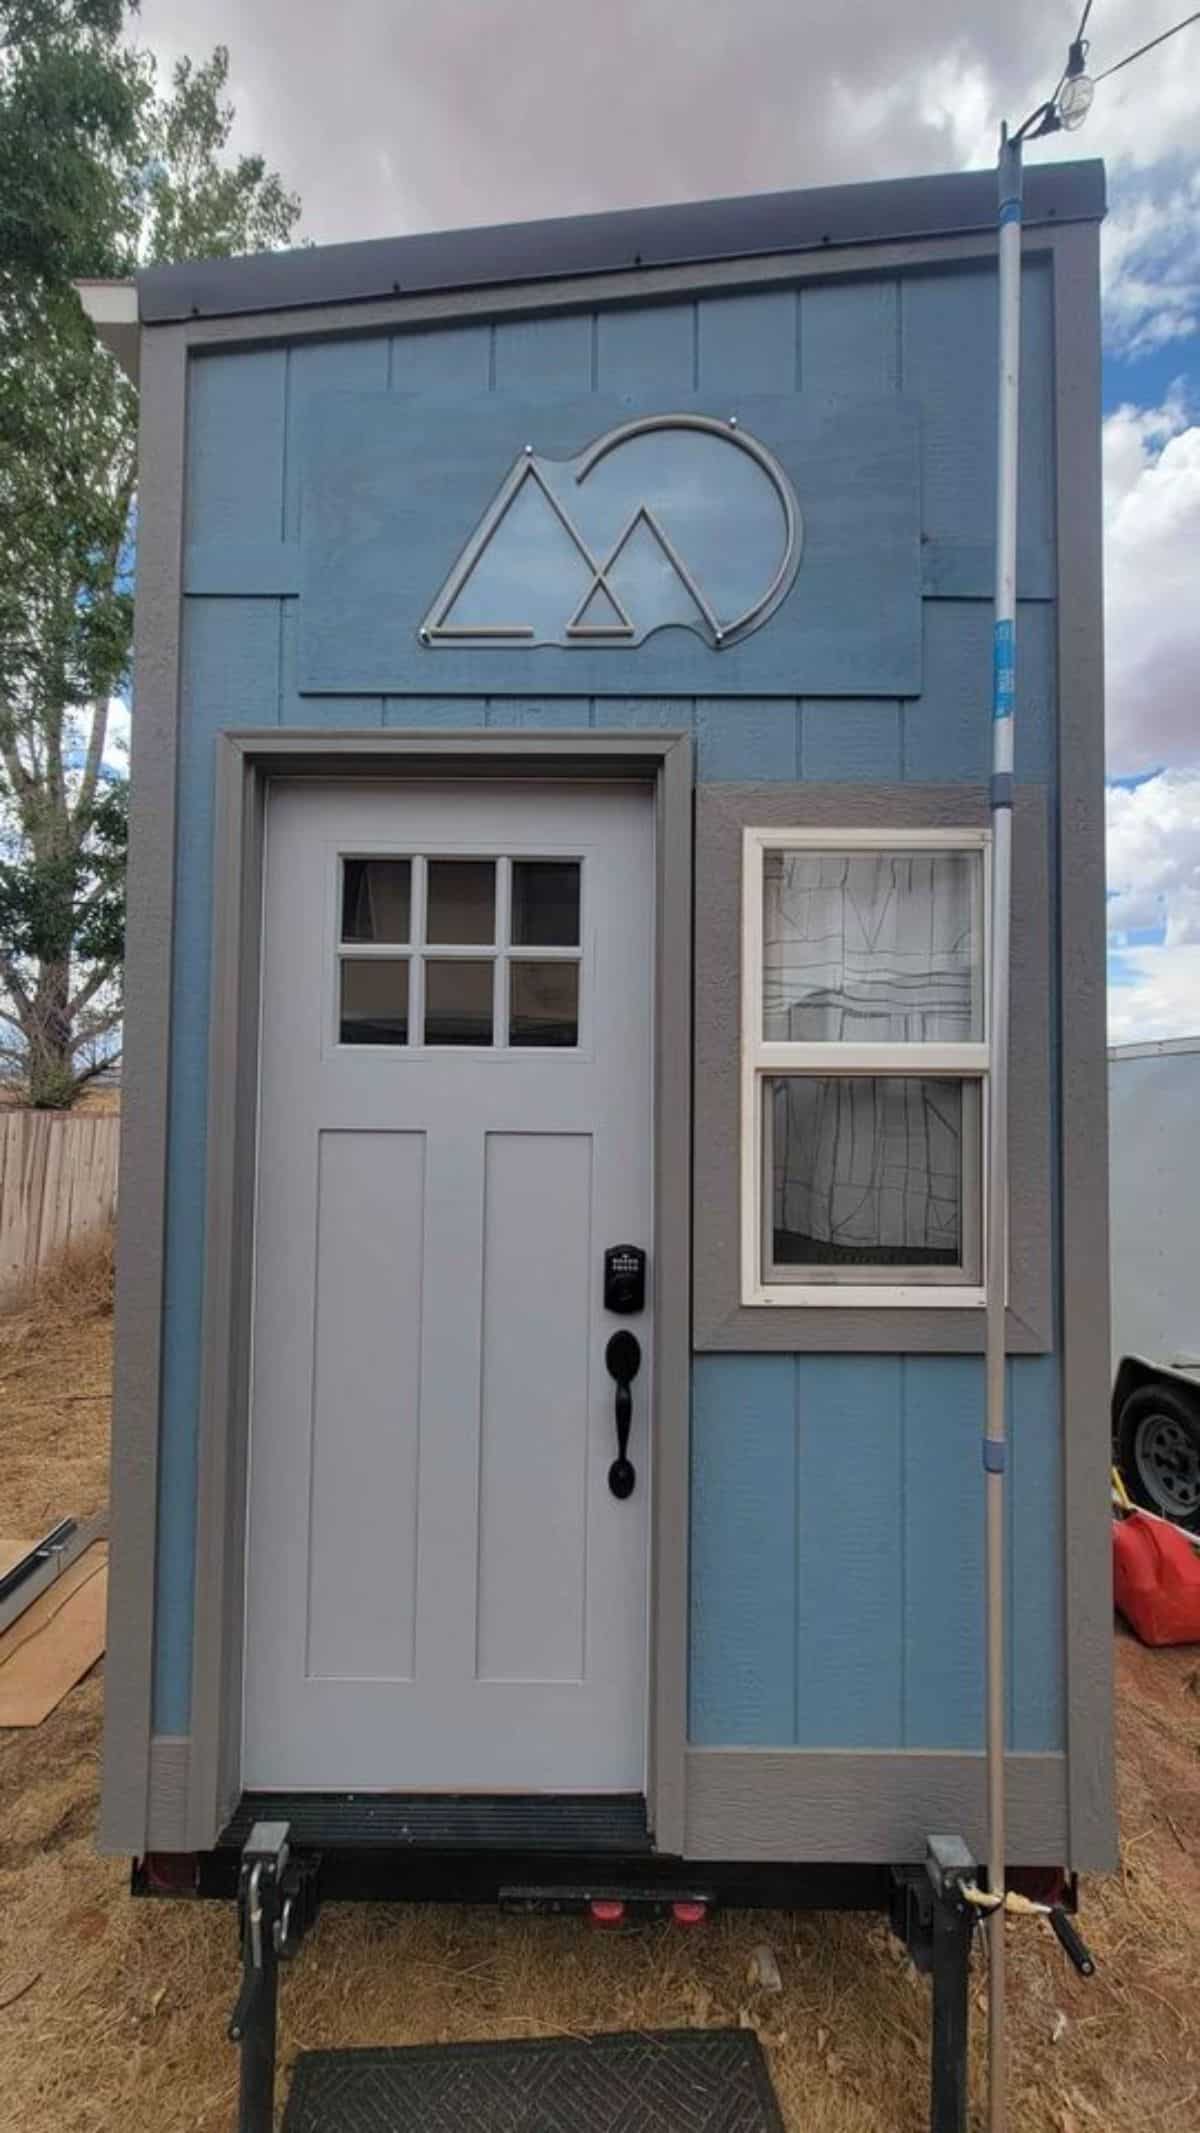 Main door of 14’ compact tiny house from outside with hook to carry with trailer